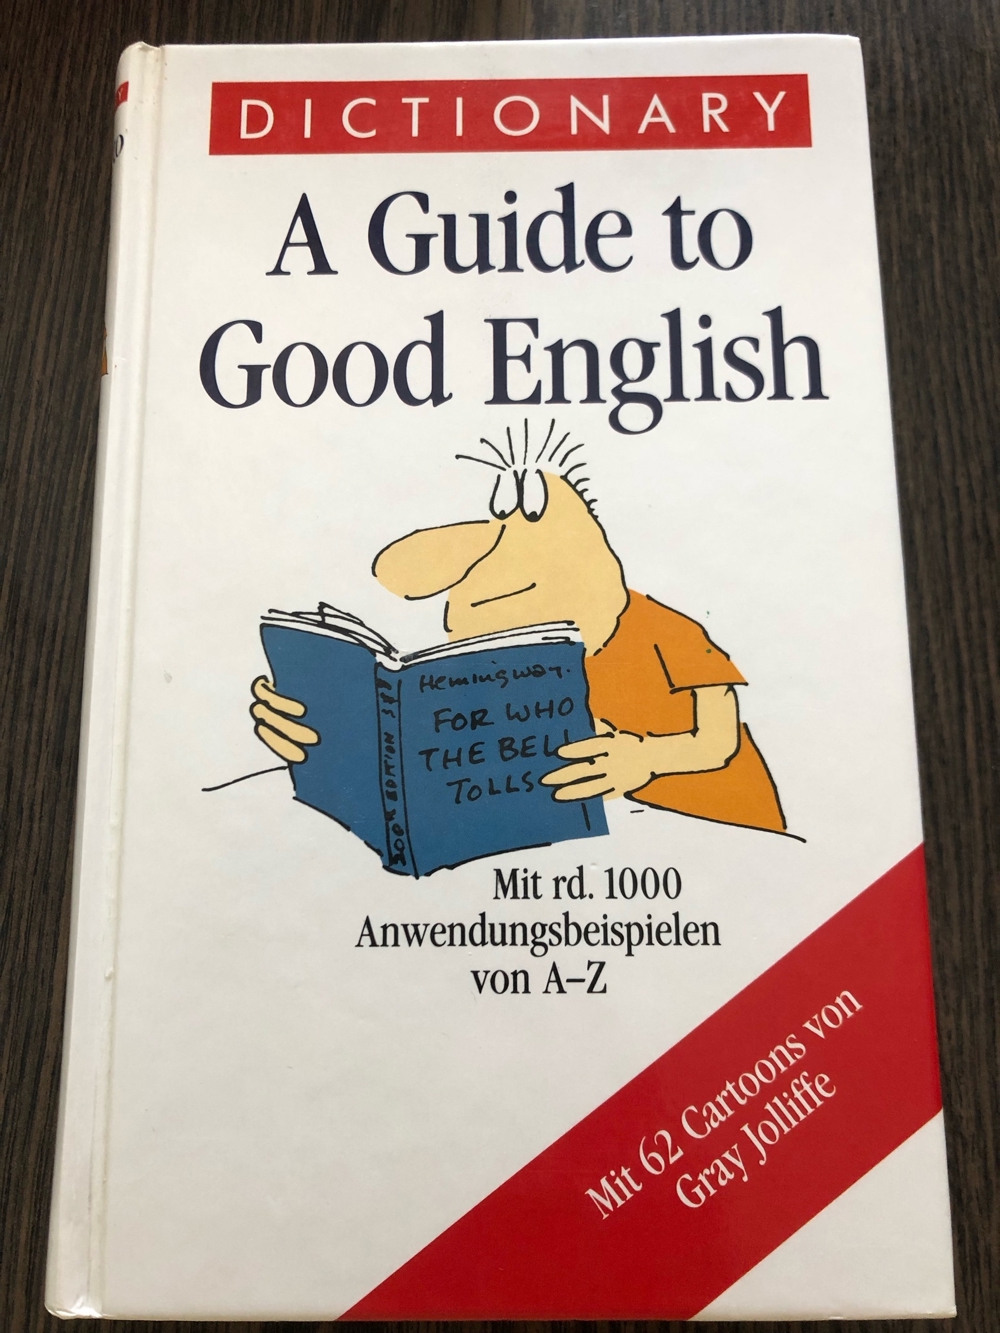 A guide to good English